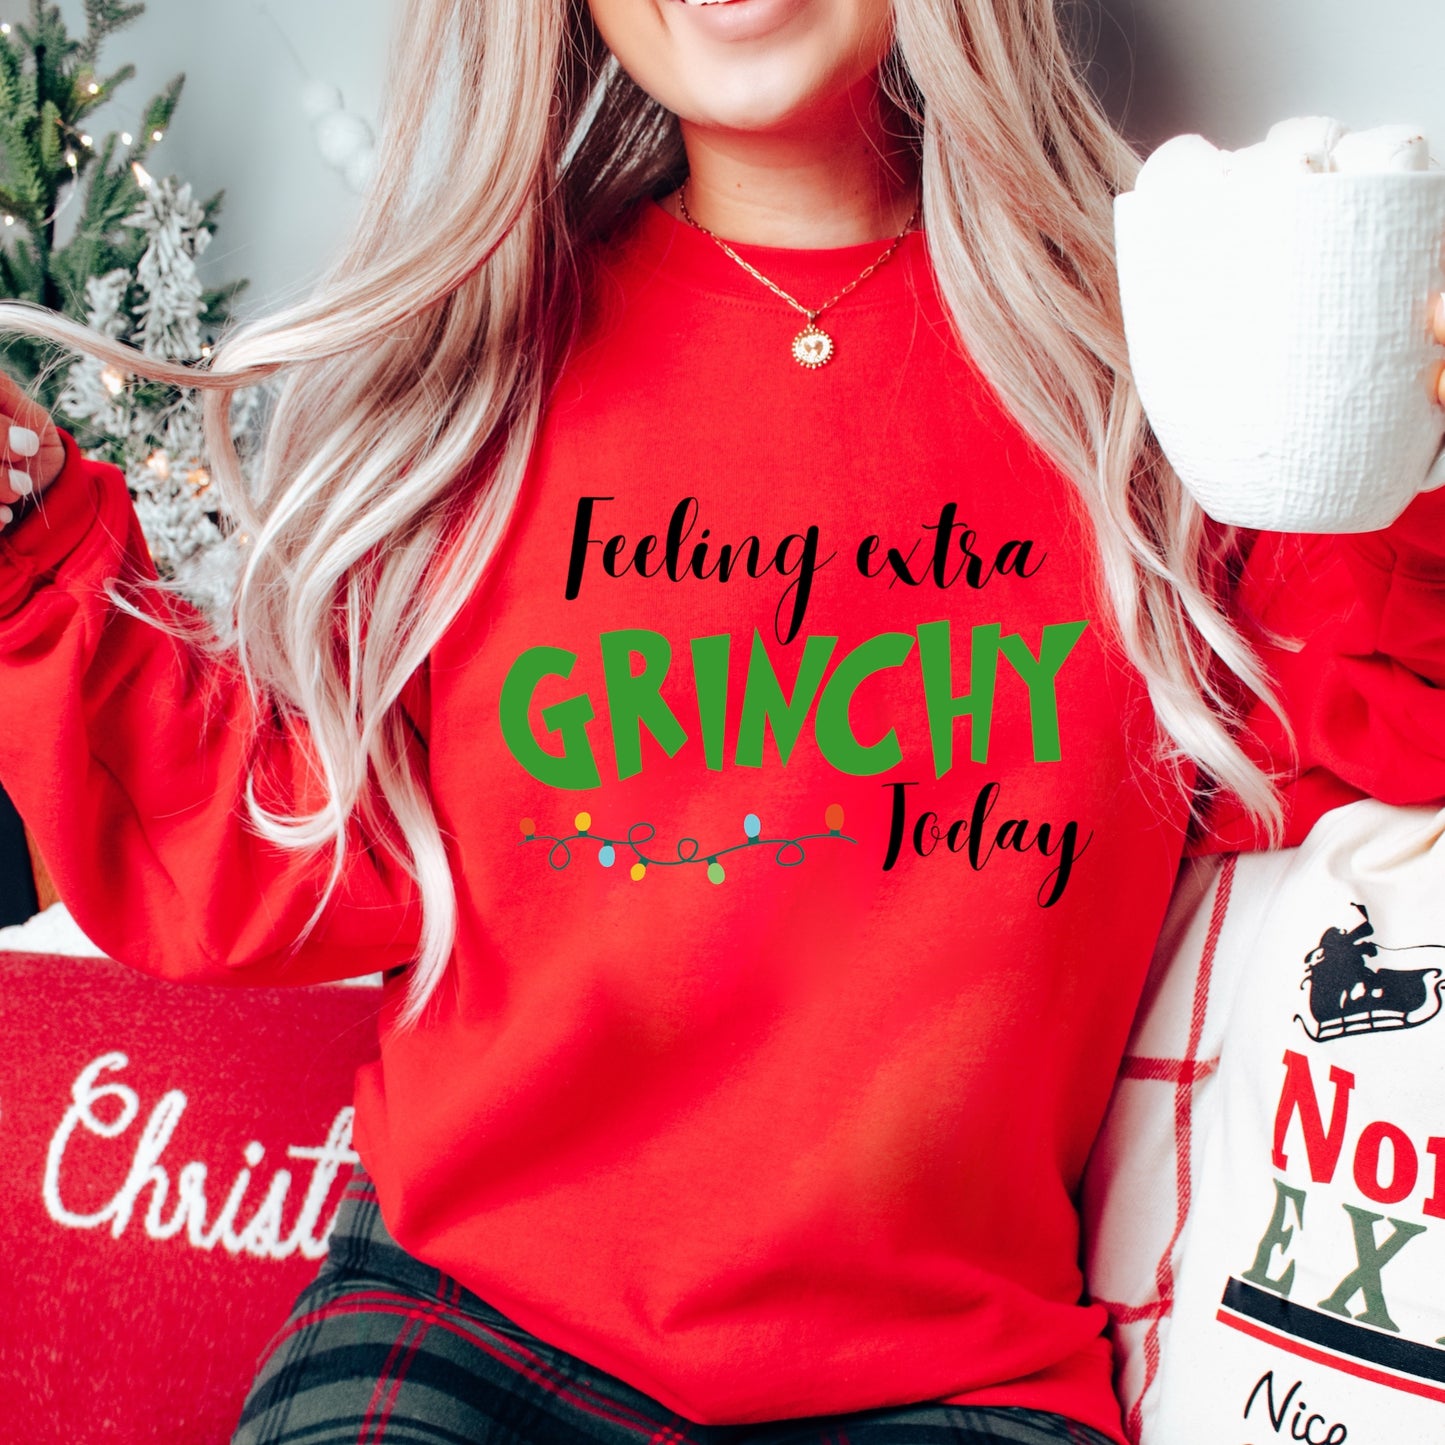 Christmas character Iron On Transfer with the words "Feeling extra Grinchy" on a red sweatshirt. Christmas Heat Transfers.